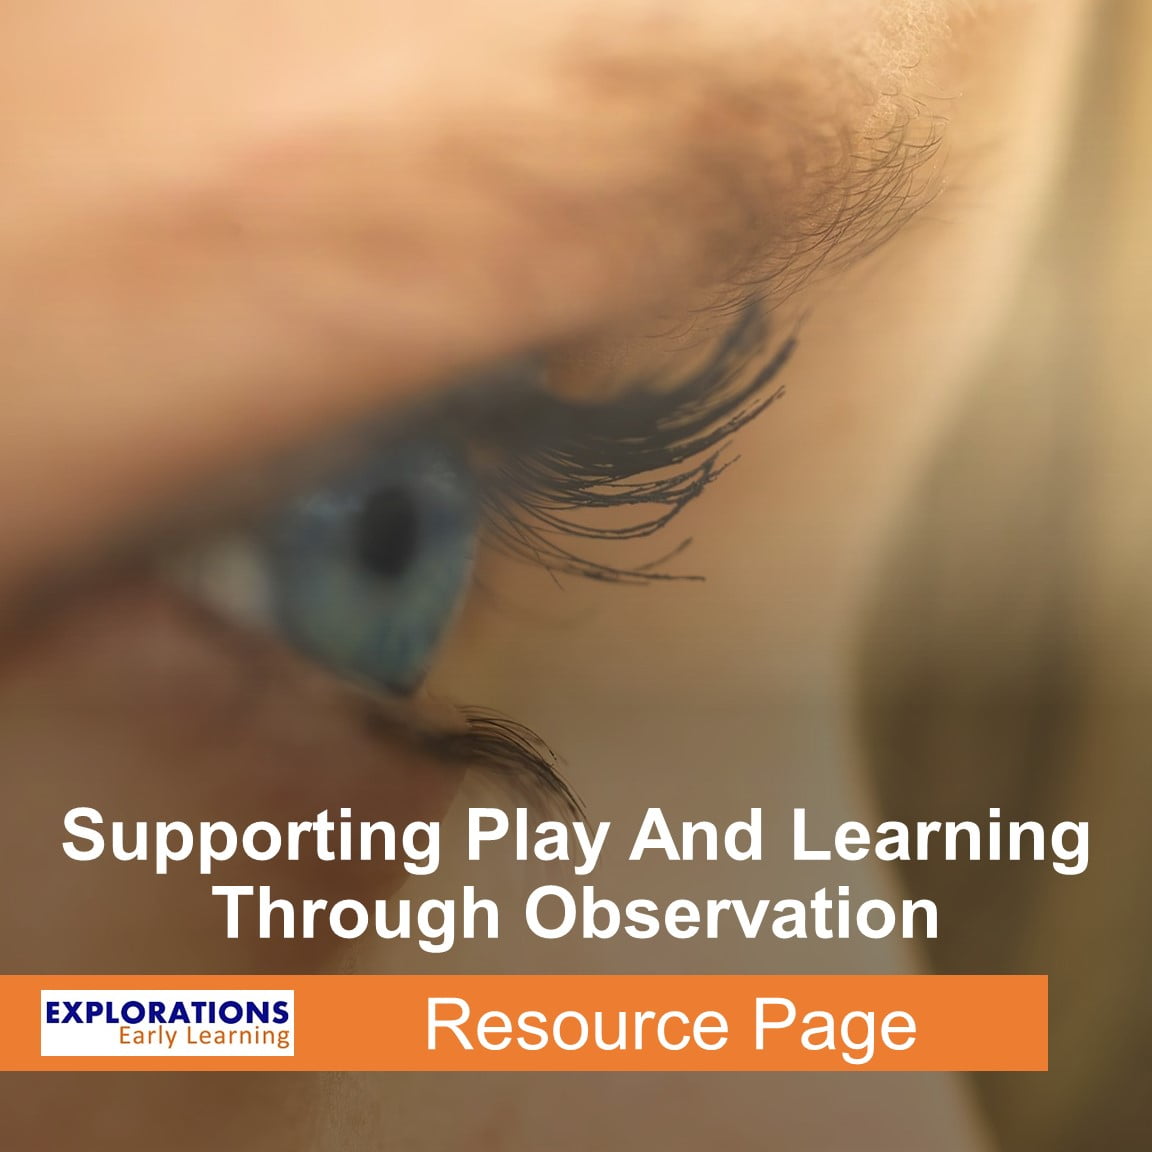 Supporting Play And Learning Through Observation | Resource Page